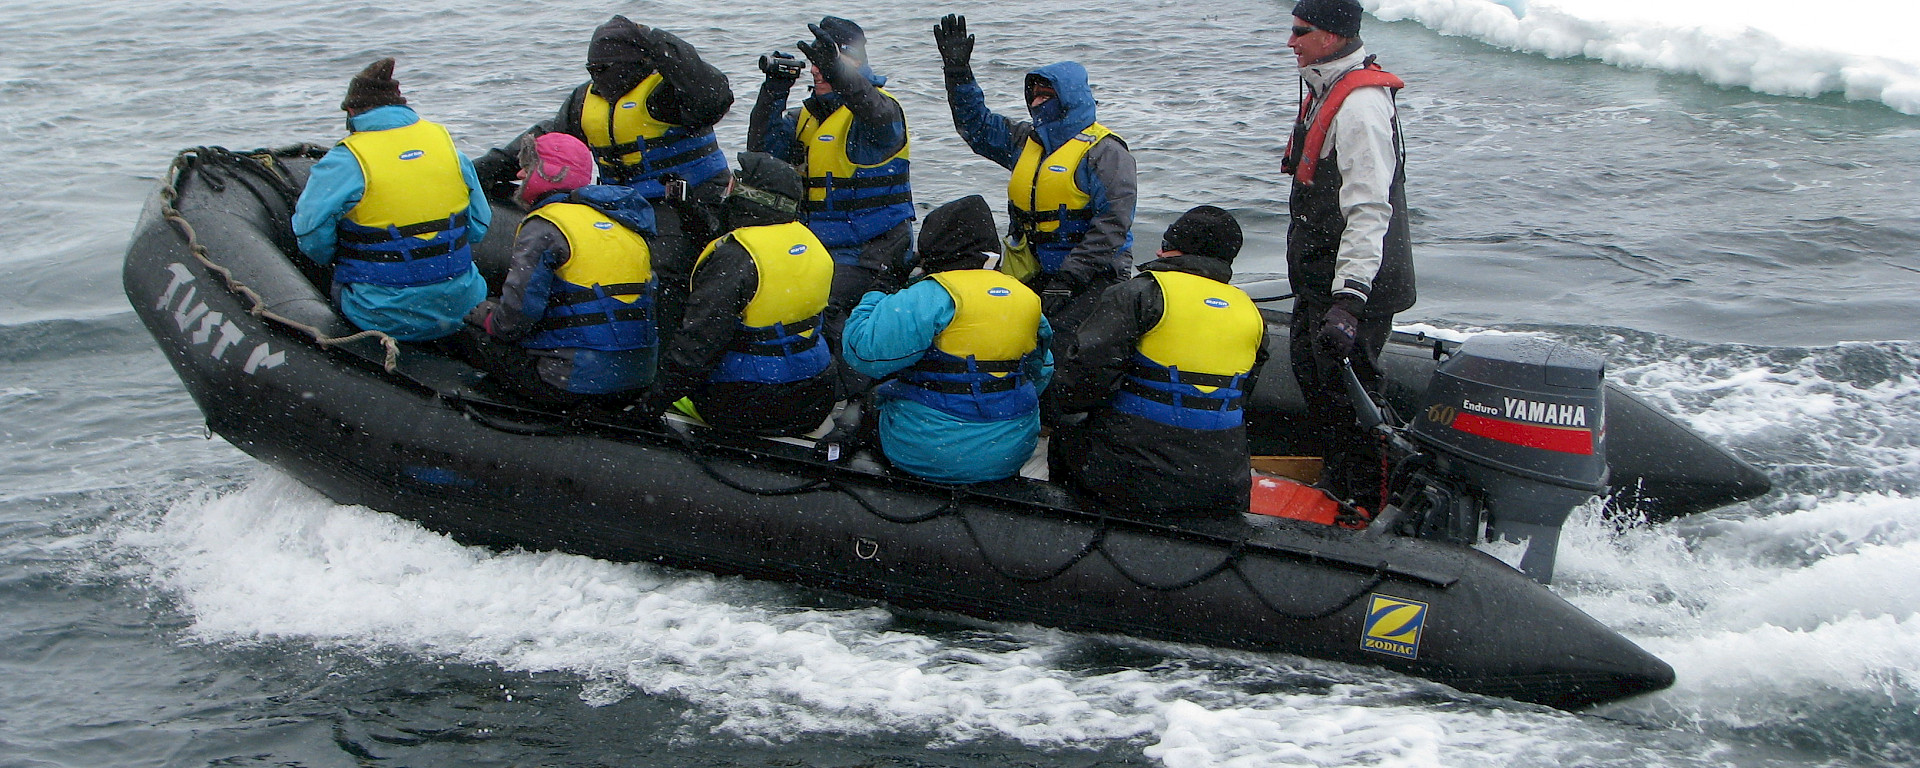 Eight tourists in an inflatable rubber boat, with an ice floe in the background